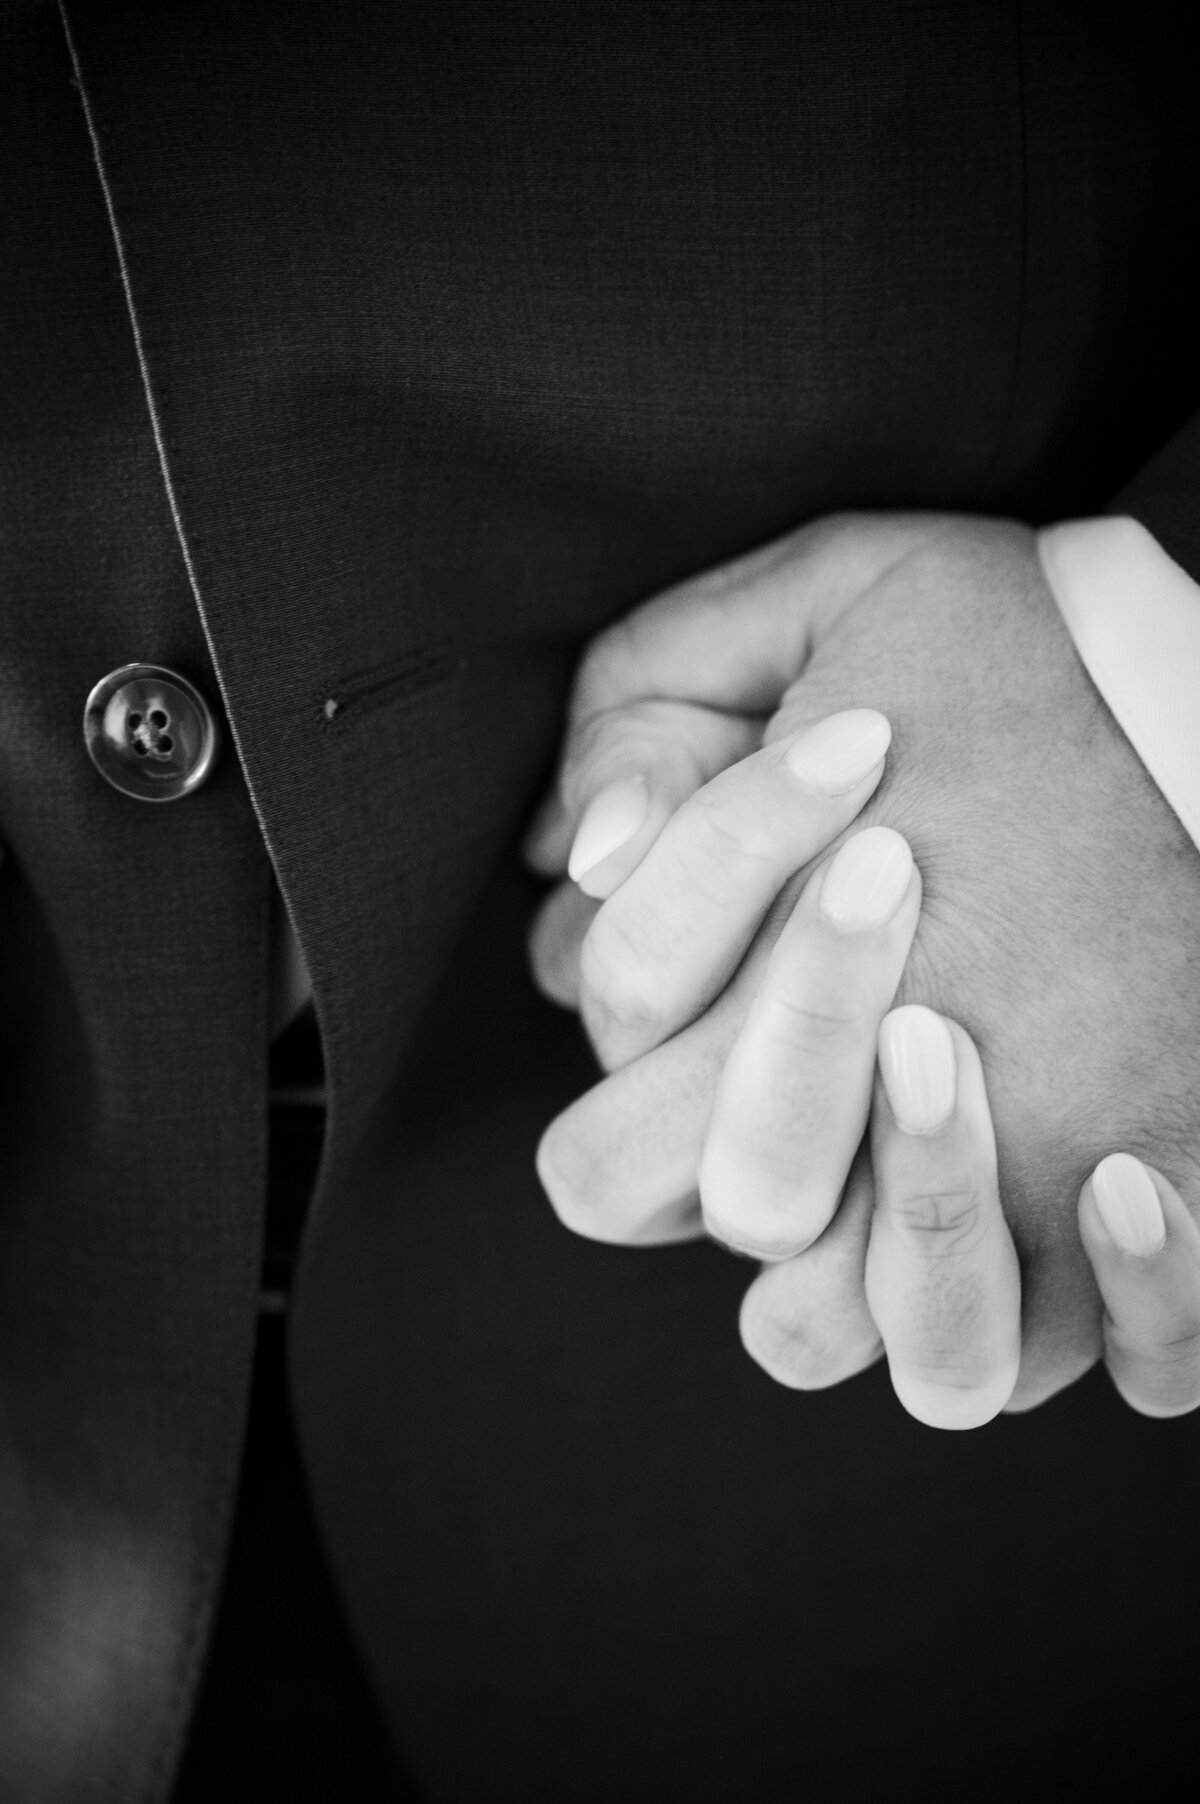 A close up shot of a bride and groom's hands intertwined.